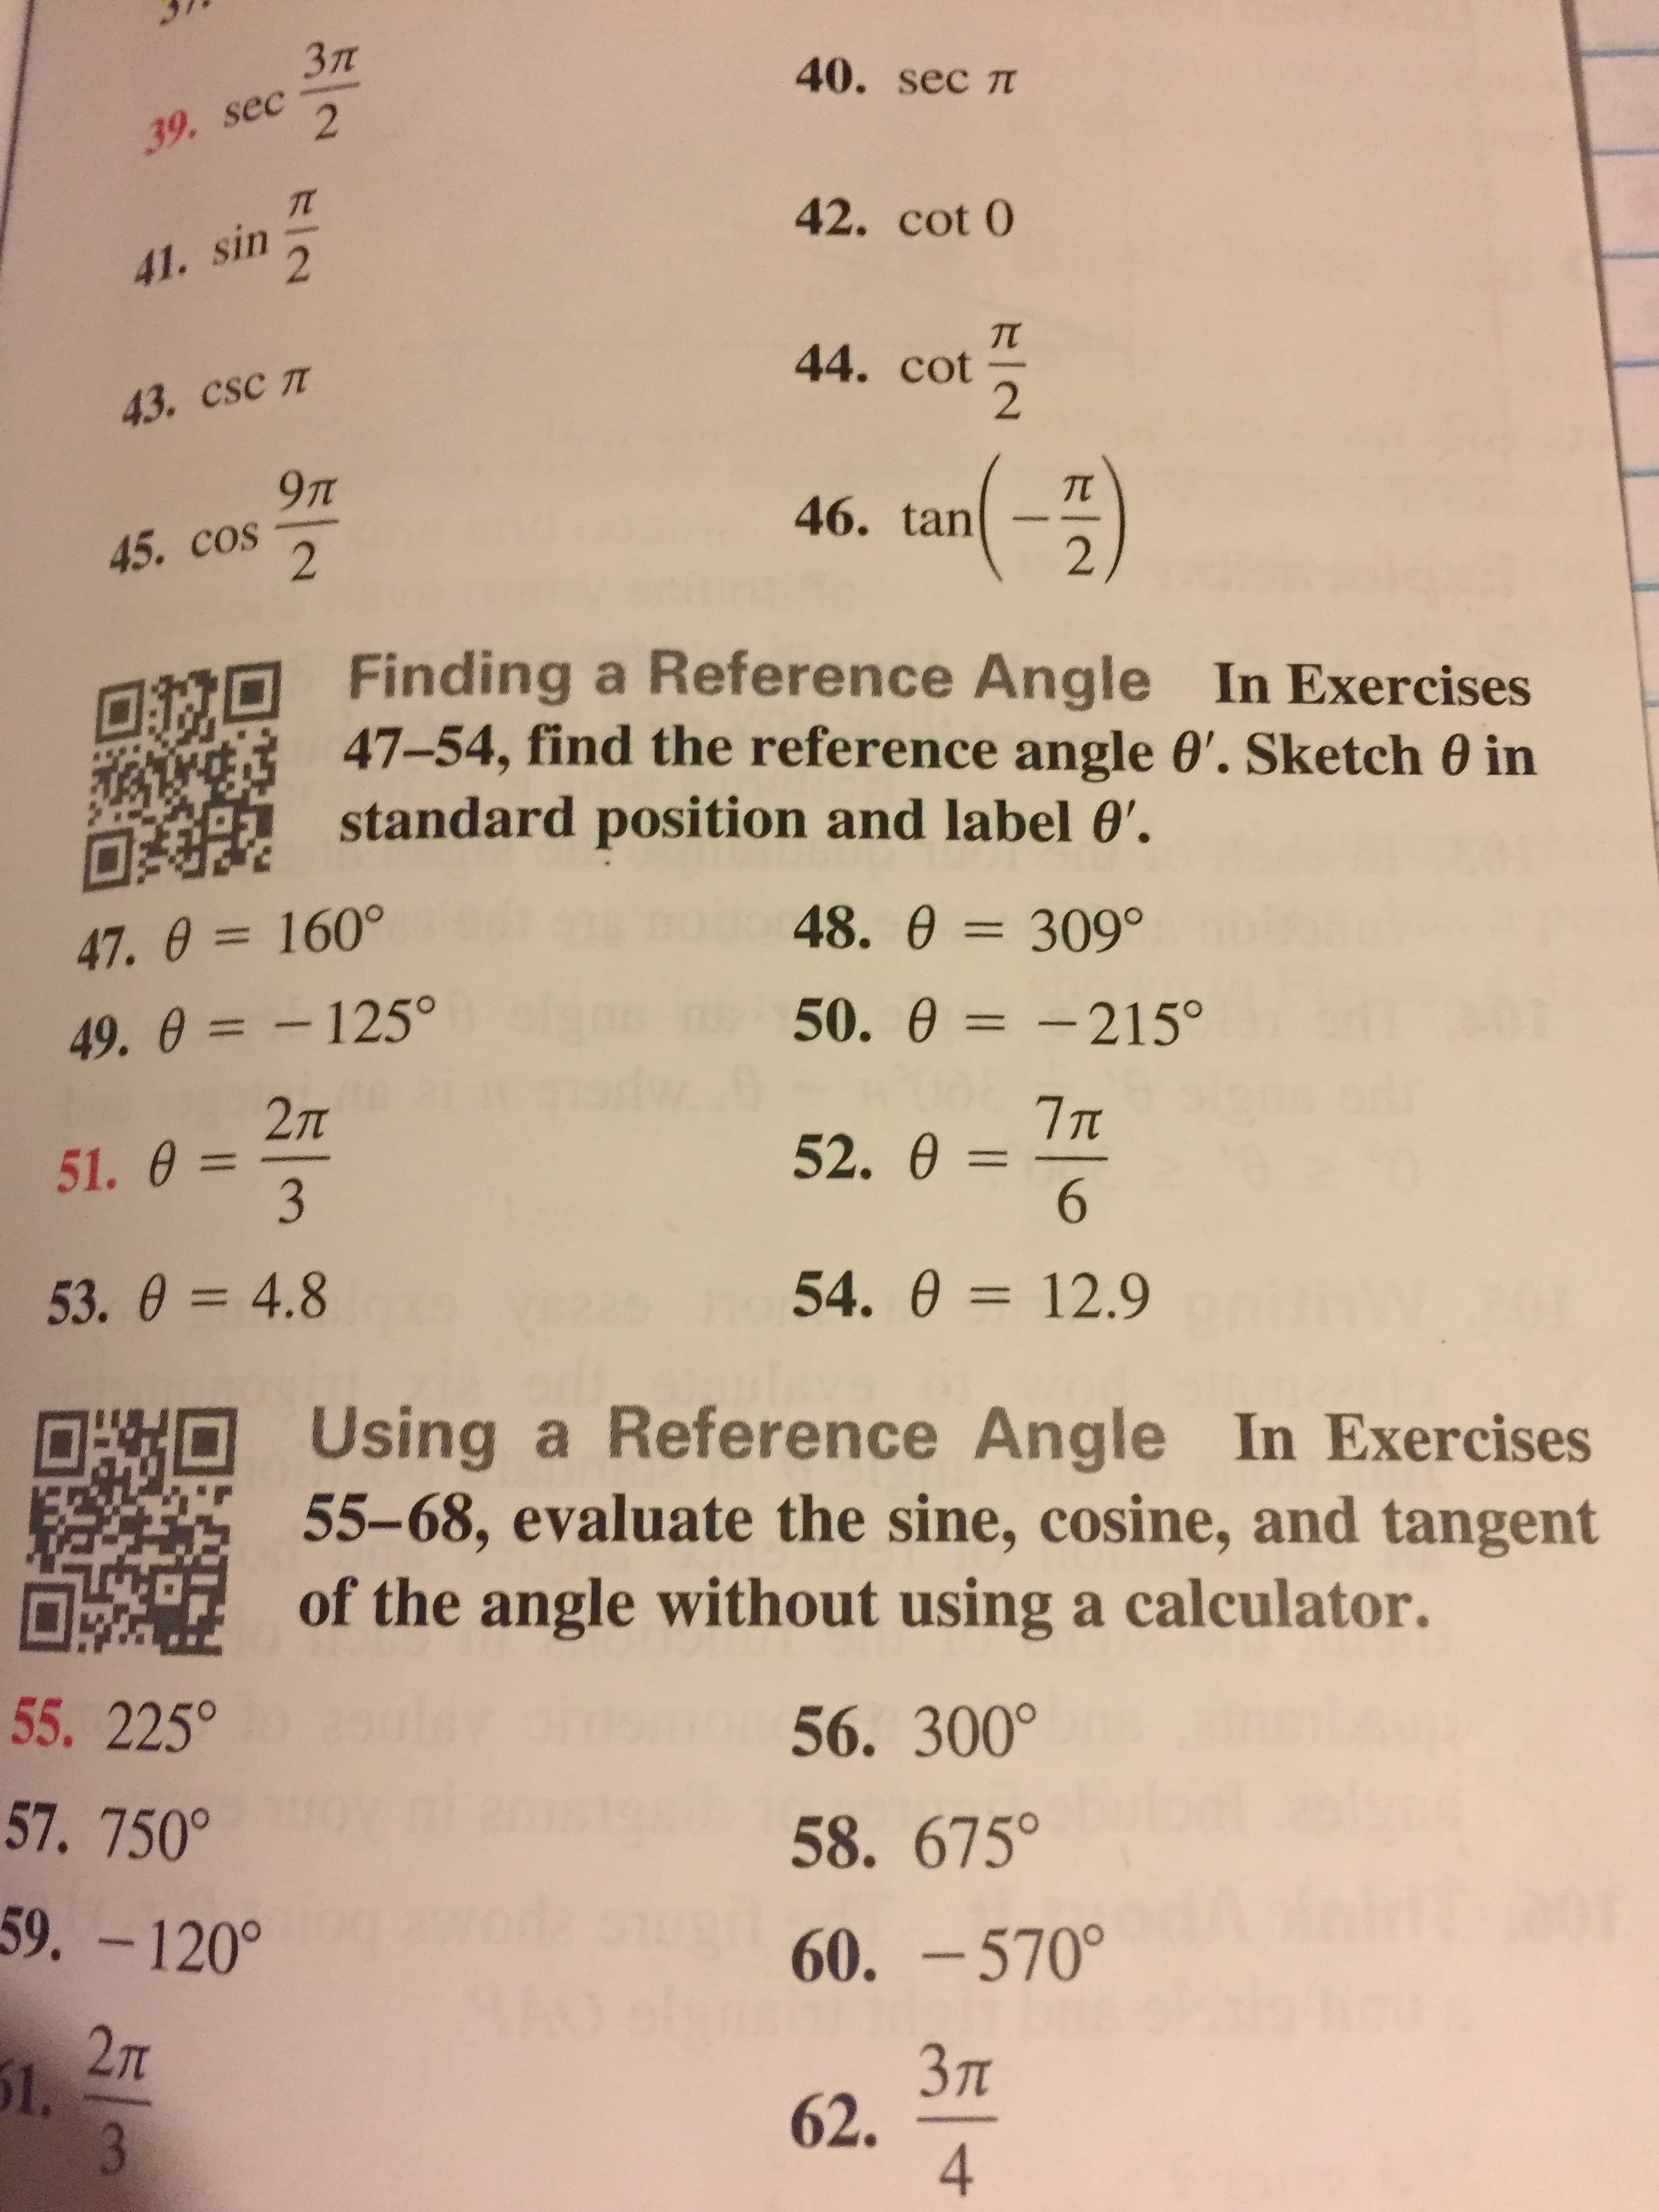 a O Finding a Reference Angle In Exercises
47-54, find the reference angle 0'. Sketch 0 in
standard position and label 0'.
47. 0 = 160°
%3D
48. 0 = 309°
49. 0 = -125°
50. 0 = -215°
:- 215°
2л
51. 0 =
52. 0 =
6.
%3D
53. 0 = 4.8
54. 0 = 12.9
%3D
